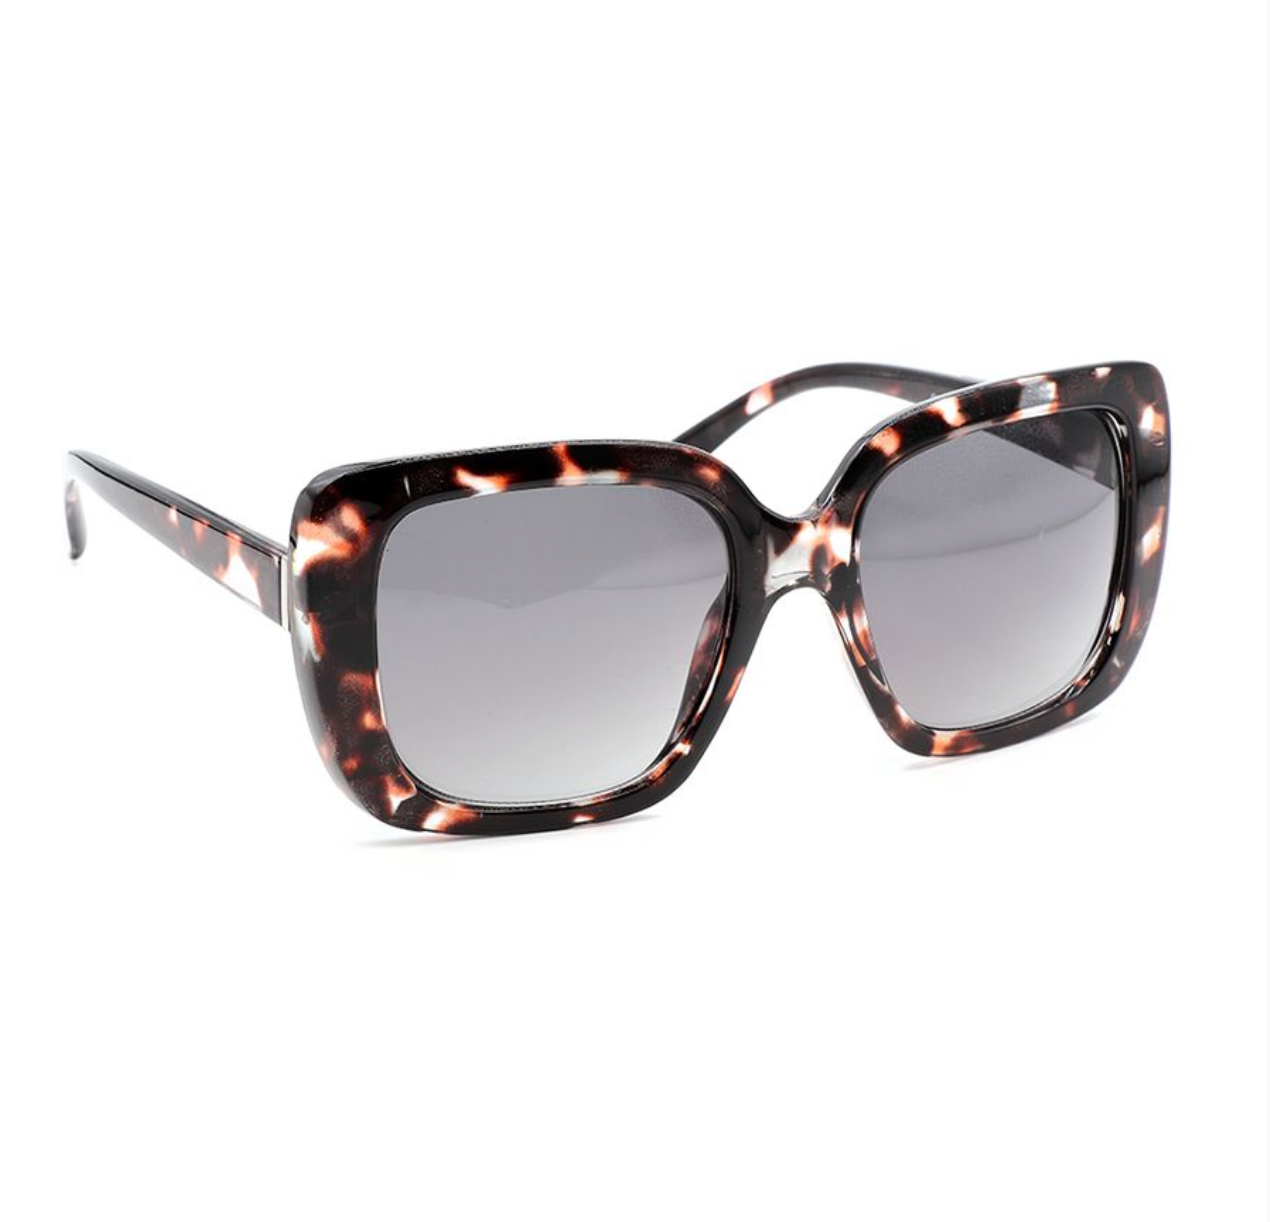 Recycled oversize square frame sunglasses